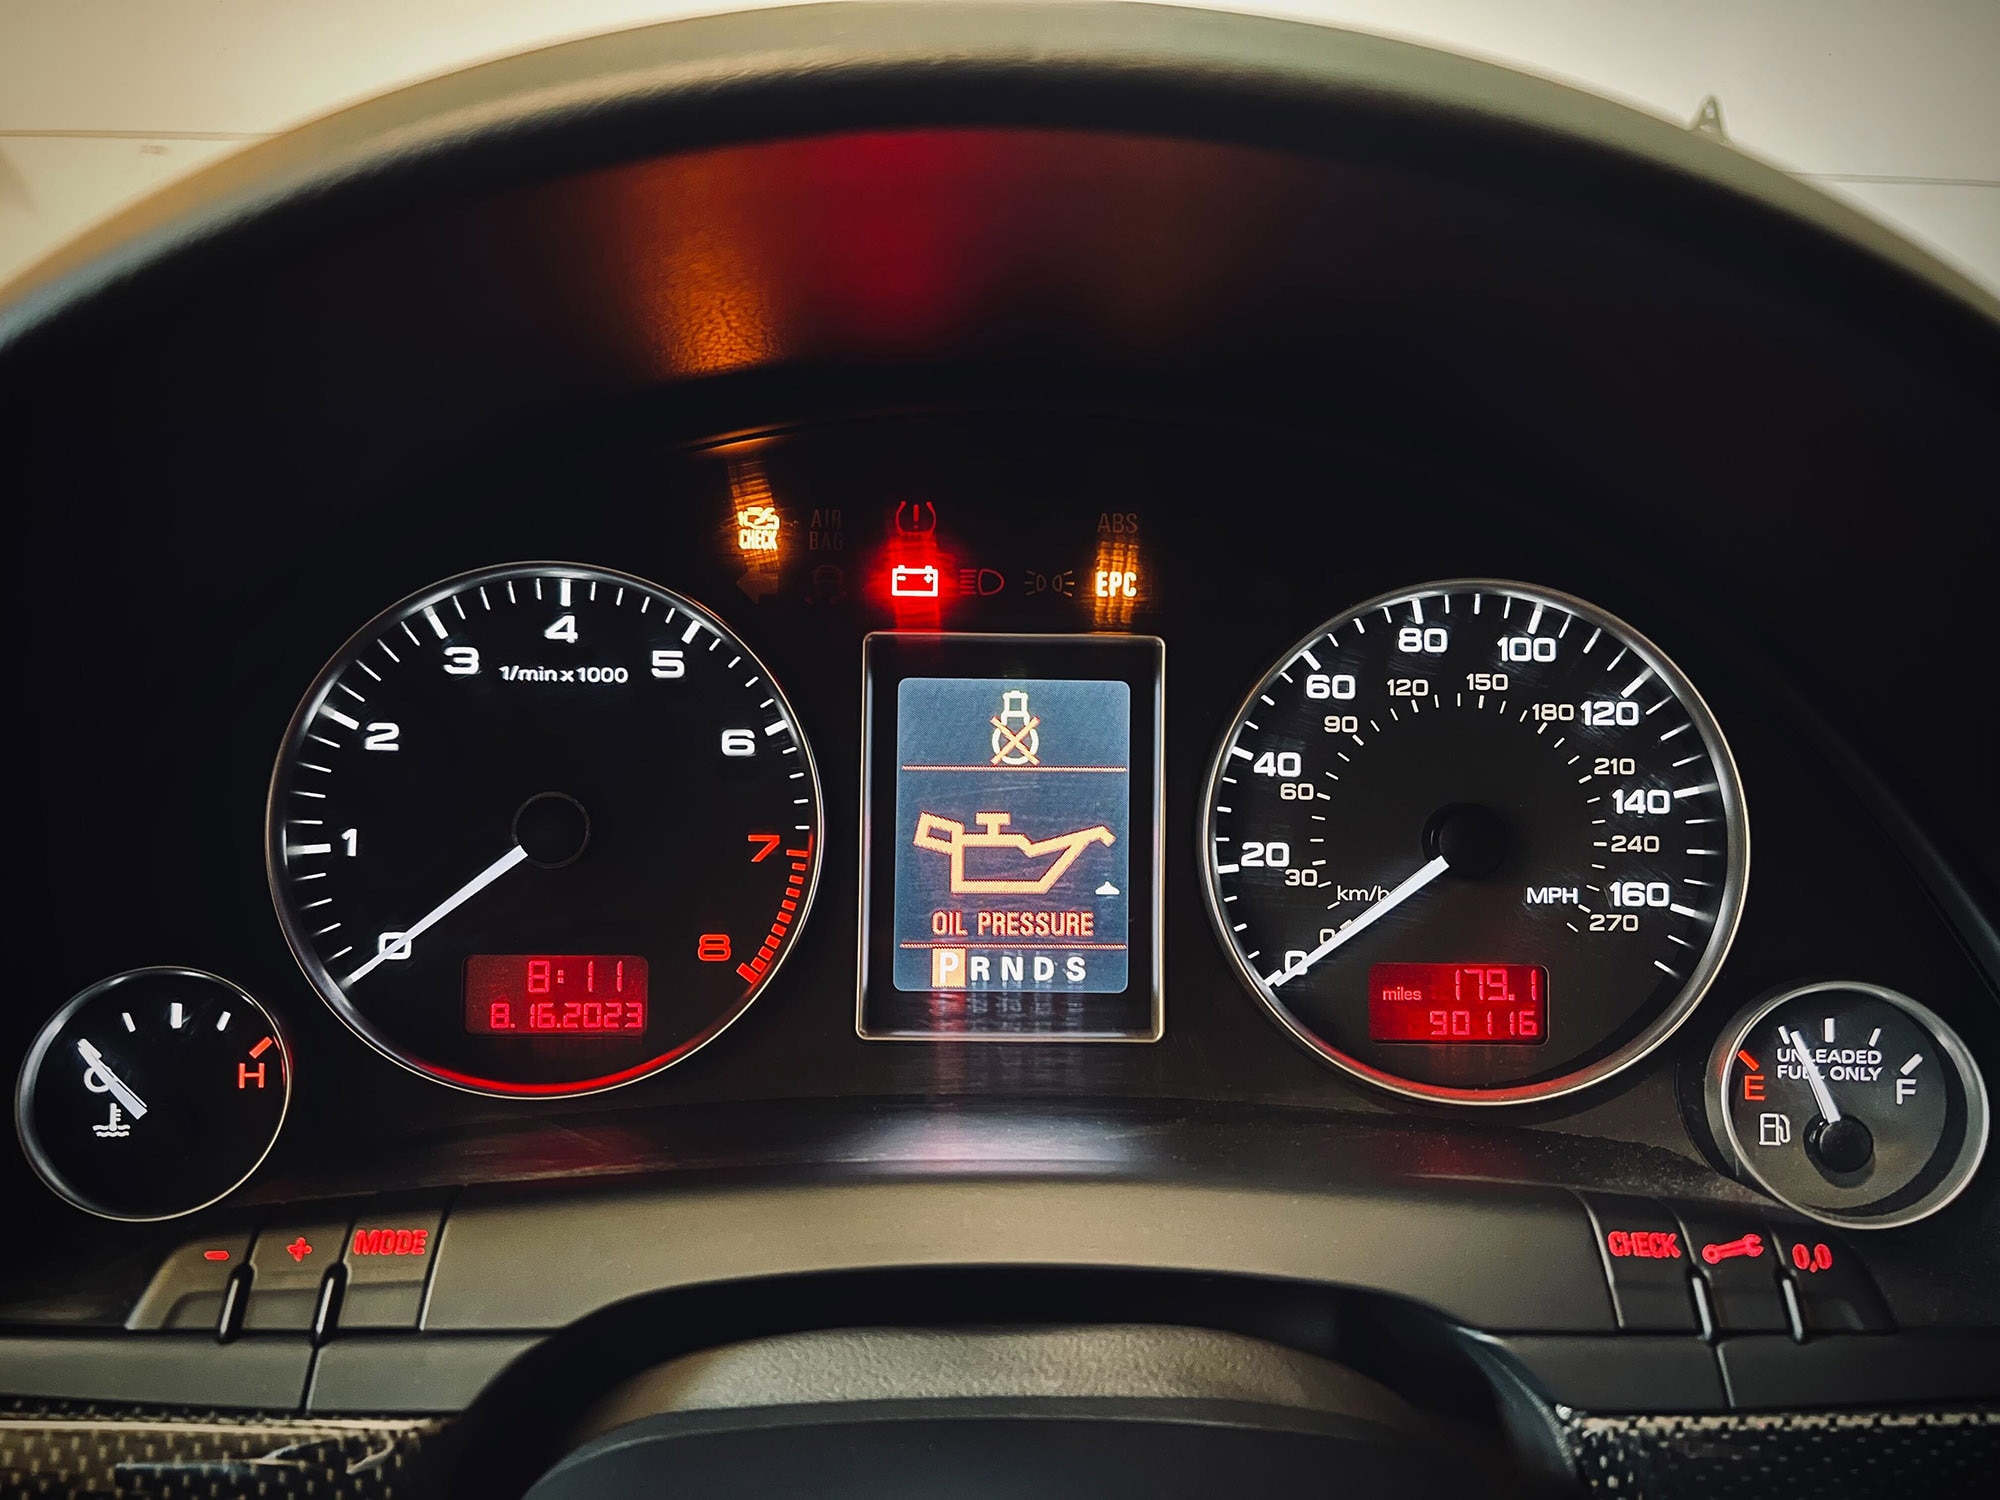 Instrument cluster displaying a check engine light while showing other warning lights.